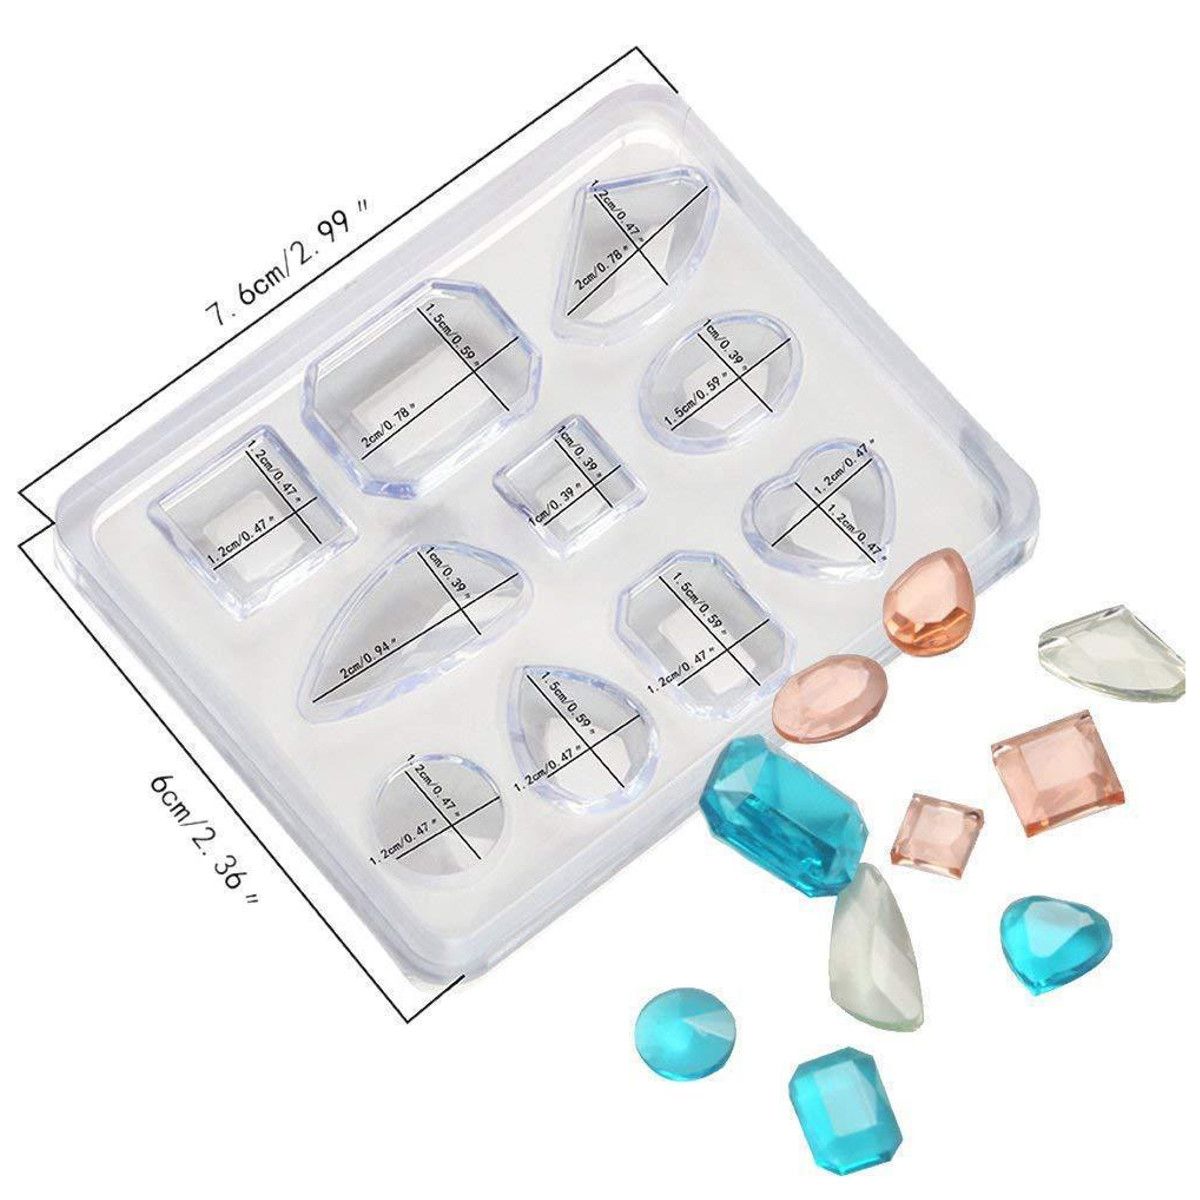 129Pcs-Resin-Casting-Molds-Kit-Silicone-Mold-Jewelry-Pendant-Mould-Set-1662278